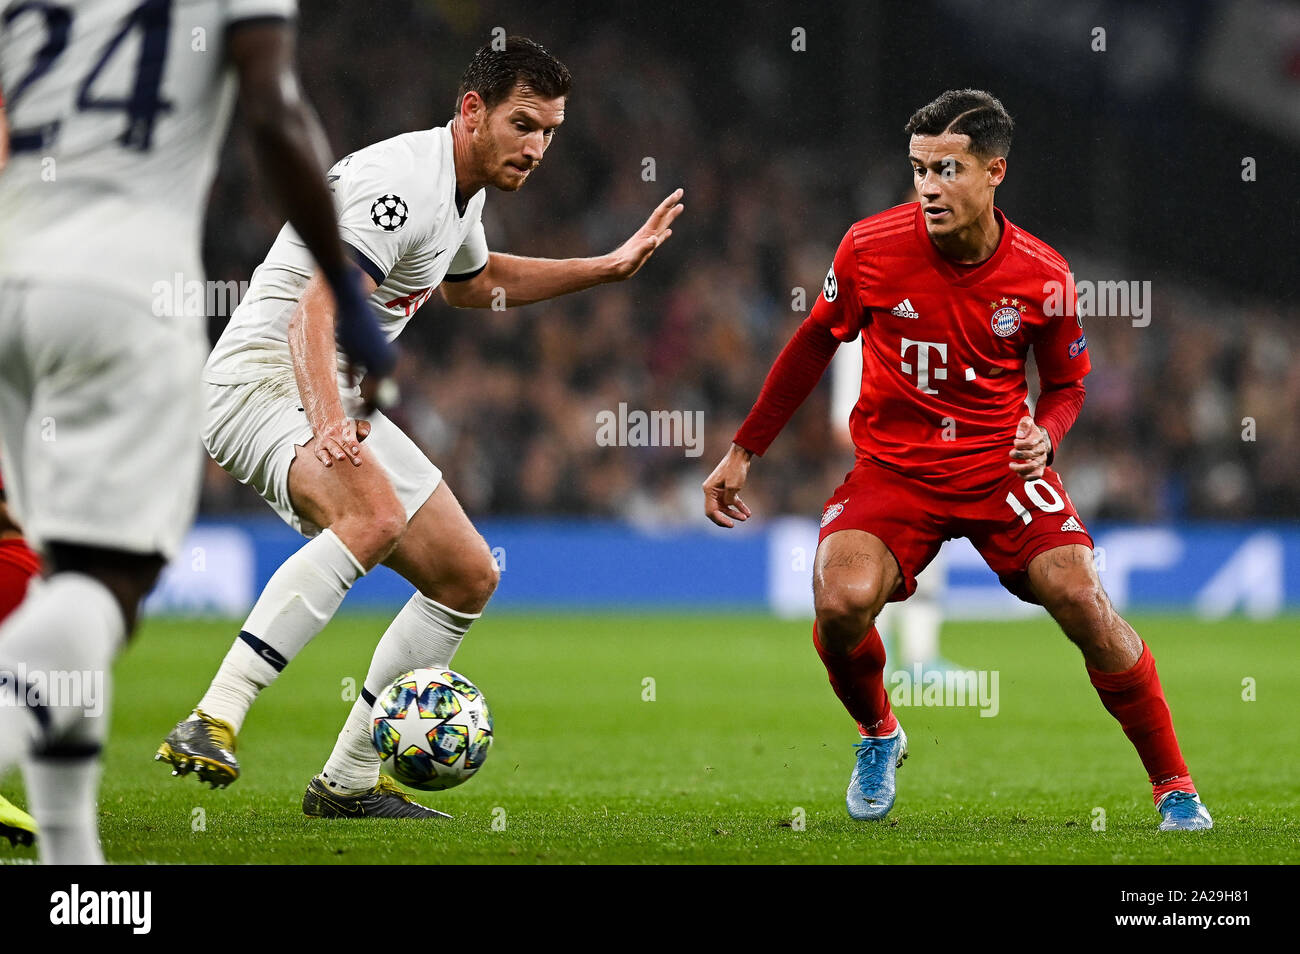 Jan Vertonghen from Tottenham Hotspur (L) and Philippe Coutinho from Bayern Munich (R) are seen in action during the UEFA Champions League (Group B) match between Tottenham Hotspur and Bayern Munich.(Final score; Tottenham Hotspur 2:7 Bayern Munich) Stock Photo